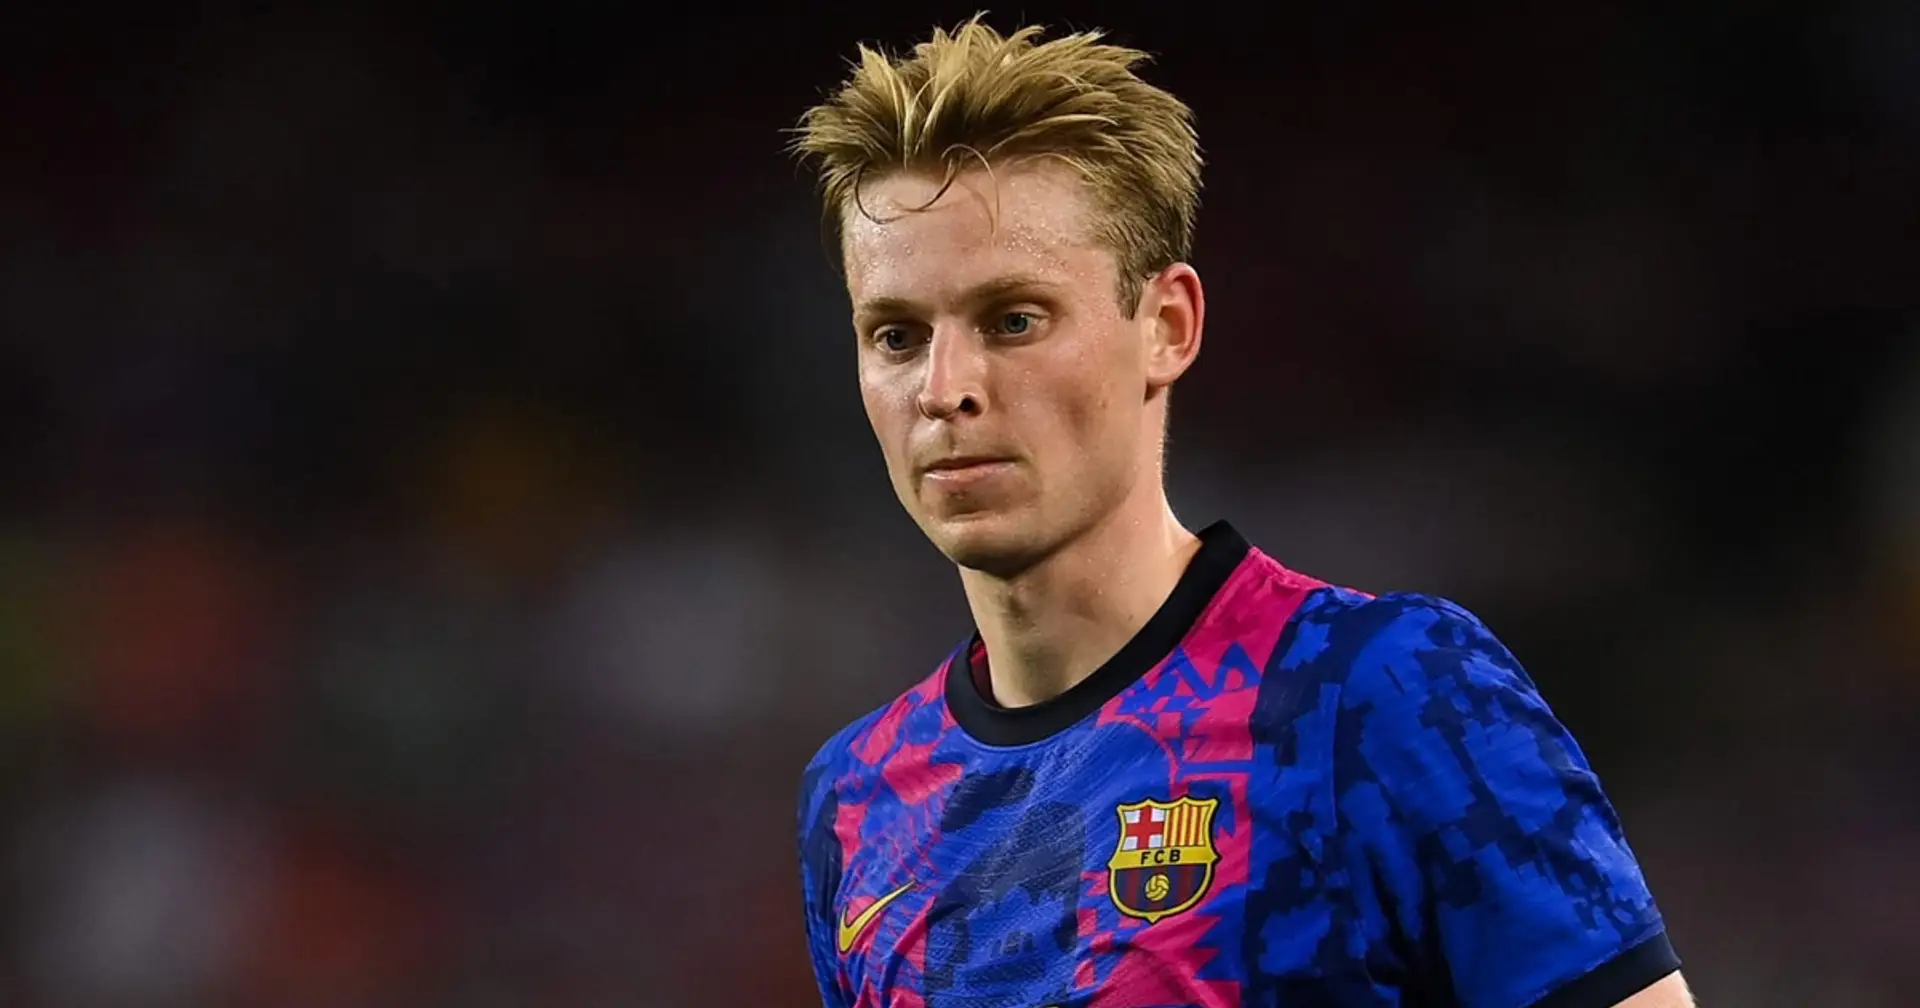 Frenkie de Jong played against Dynamo through injury as he wanted to help Barca